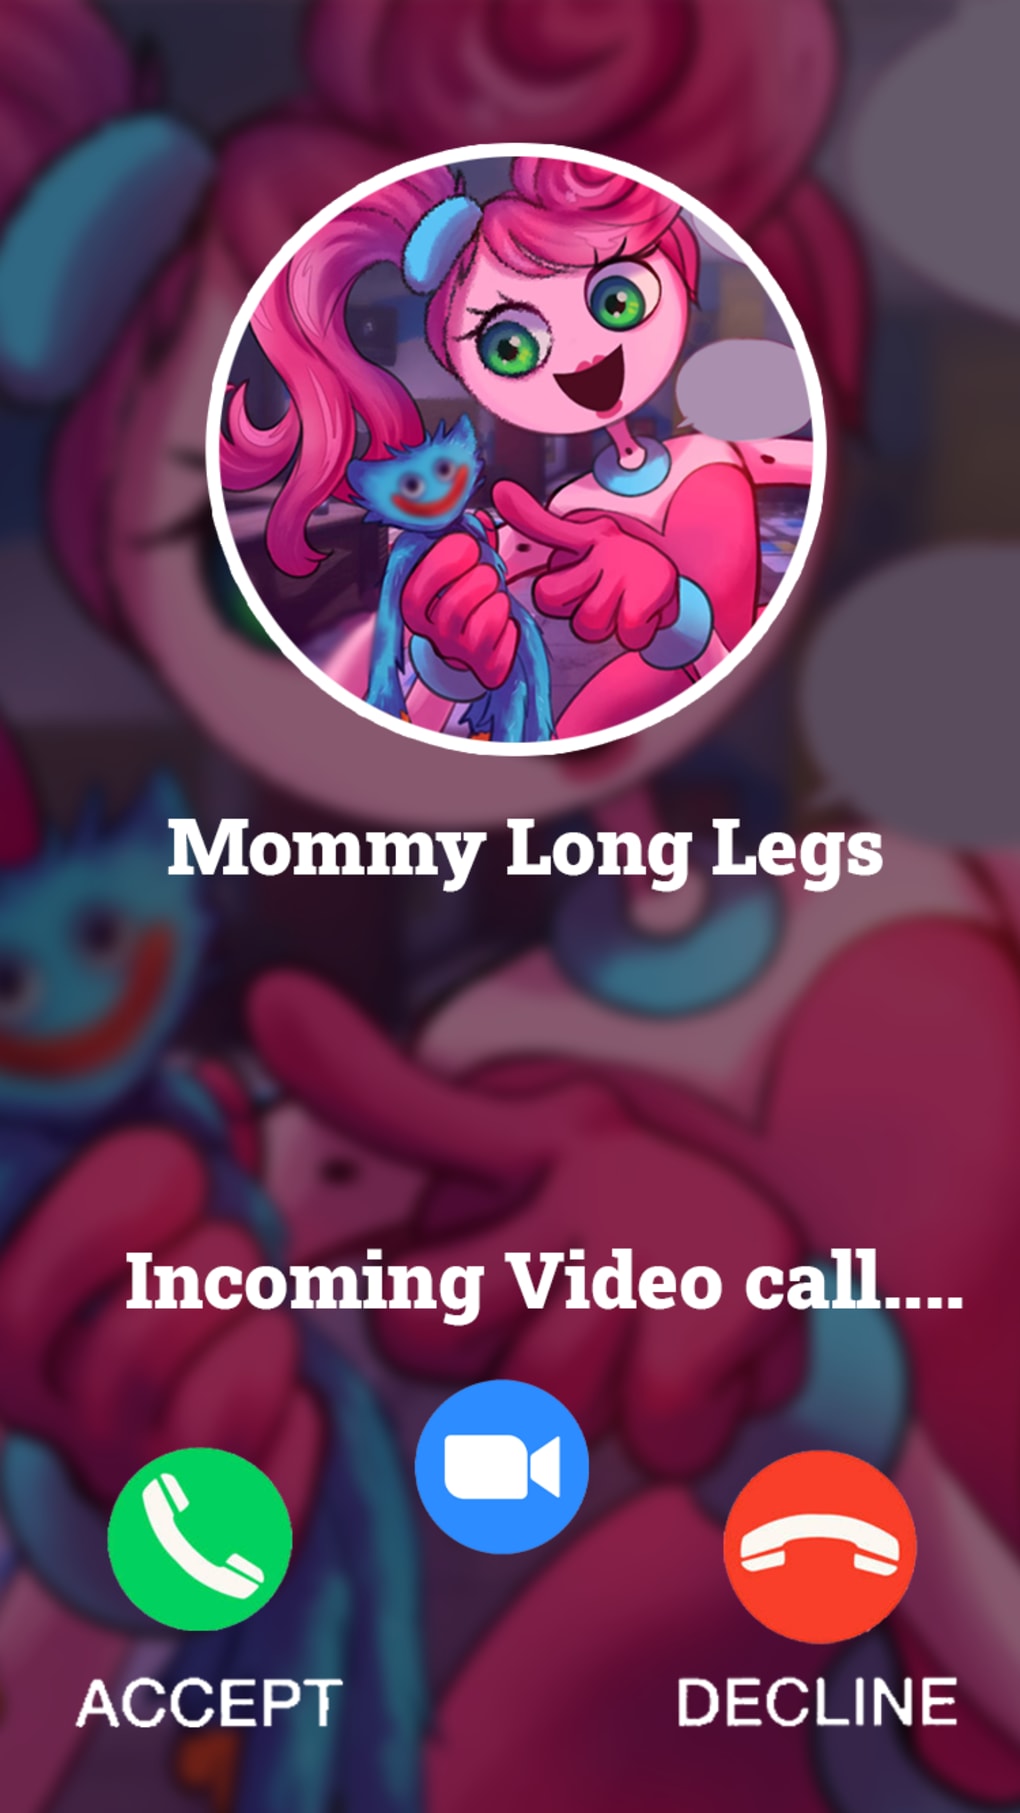 About: Mommy Long Legs chapter 2 HD (Google Play version)